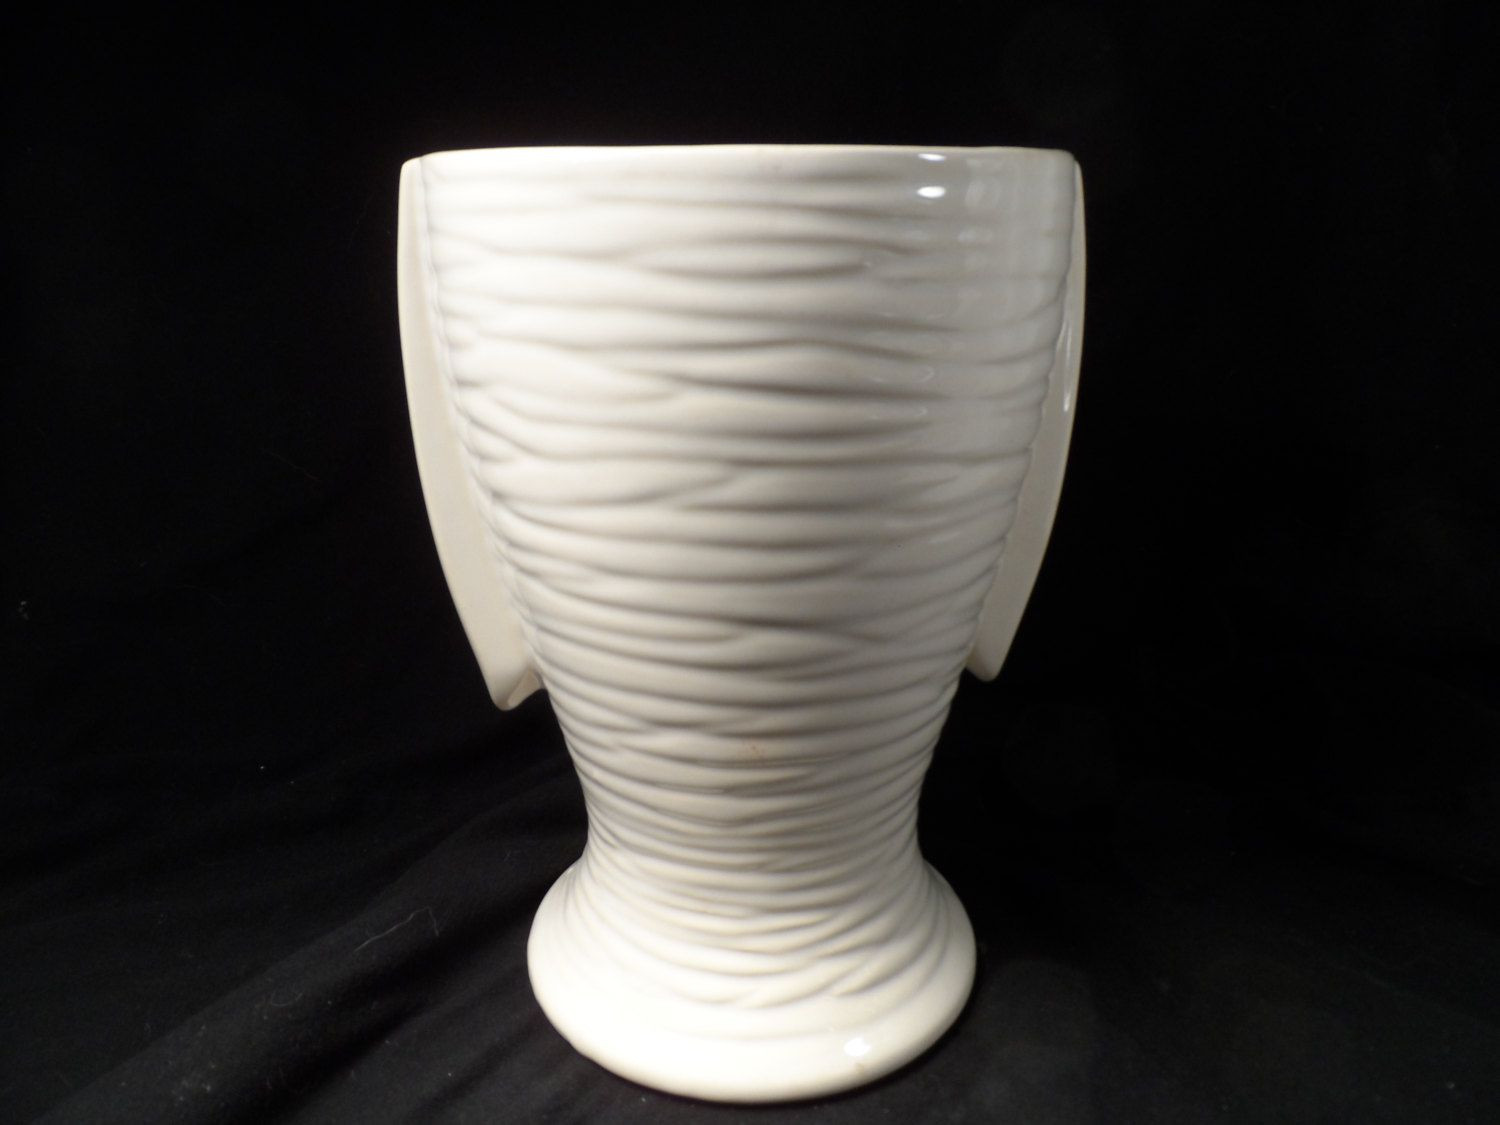 13 Recommended Abingdon Usa Pottery Vase 2024 free download abingdon usa pottery vase of vintage vase scares mccoy usa vase 1940s art deco two handle ivory regarding vintage vase scares mccoy usa vase 1940s art deco two handle ivory matt glaze finish